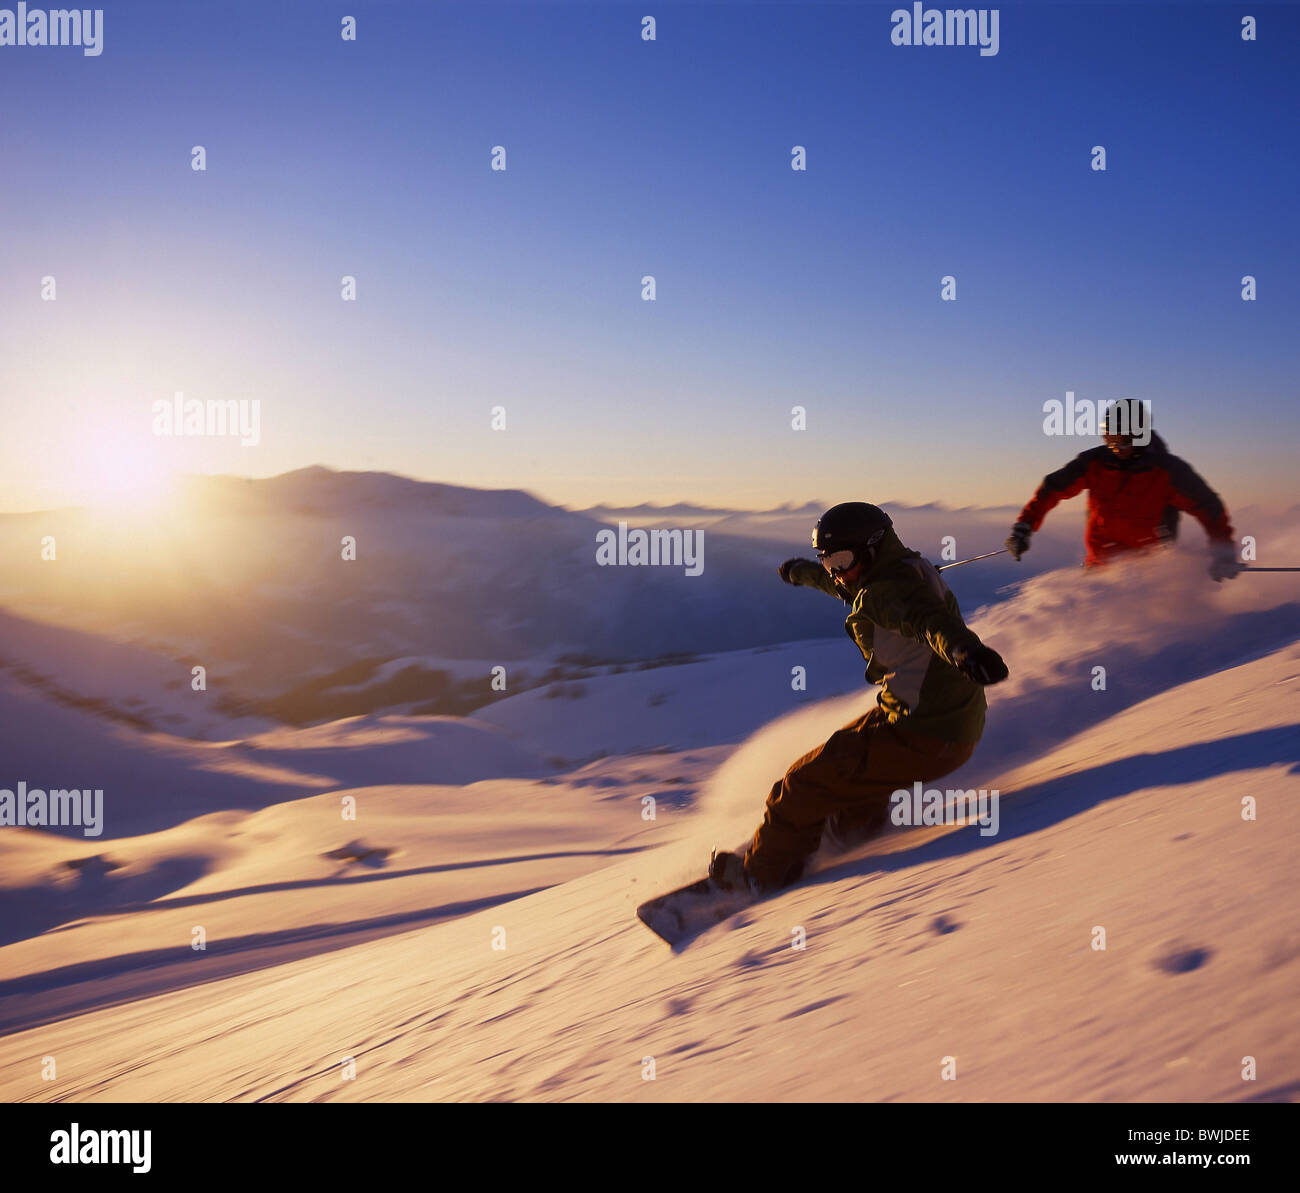 two persons Snowboarder snowboard Snowboarding winter winter sports deep snow snow sports mountains Alps m Stock Photo